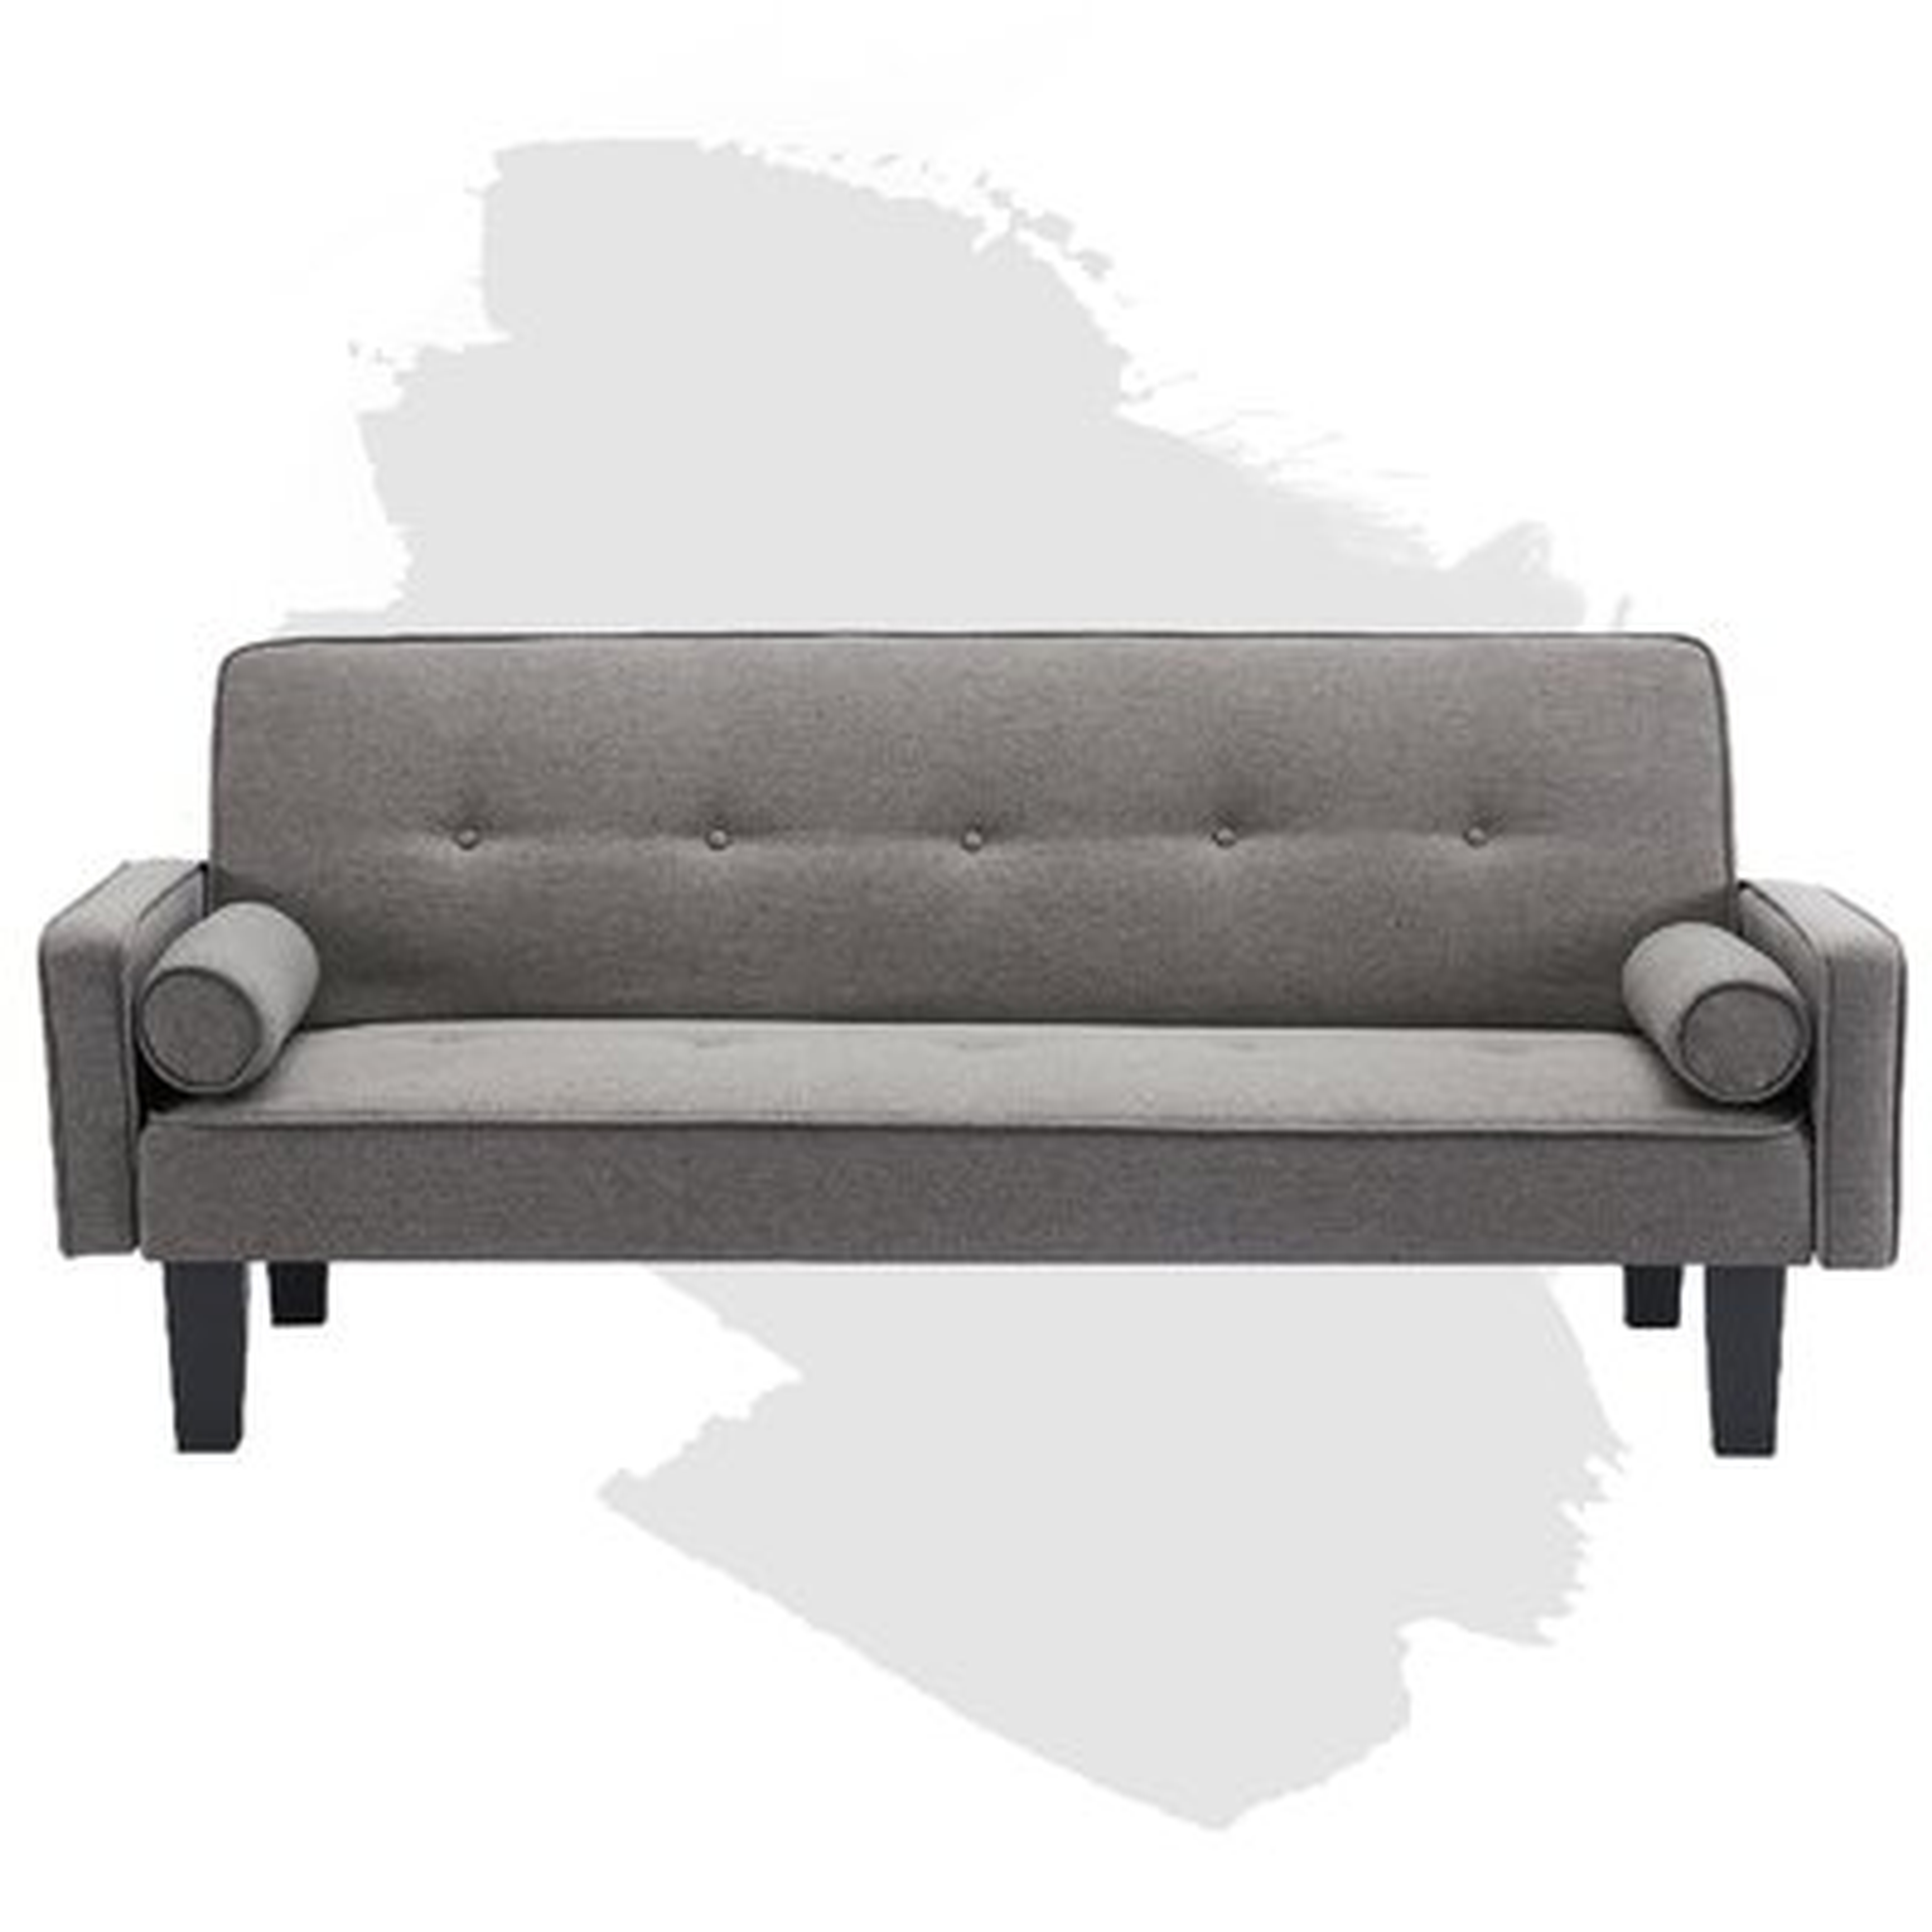 Futon Sofa Bed Couch, Convertible Folding Recliner Lounge Futon Couch For Living Room,Sleeper Couch With Premium Linen Upholstery And Plastic Legs - Wayfair